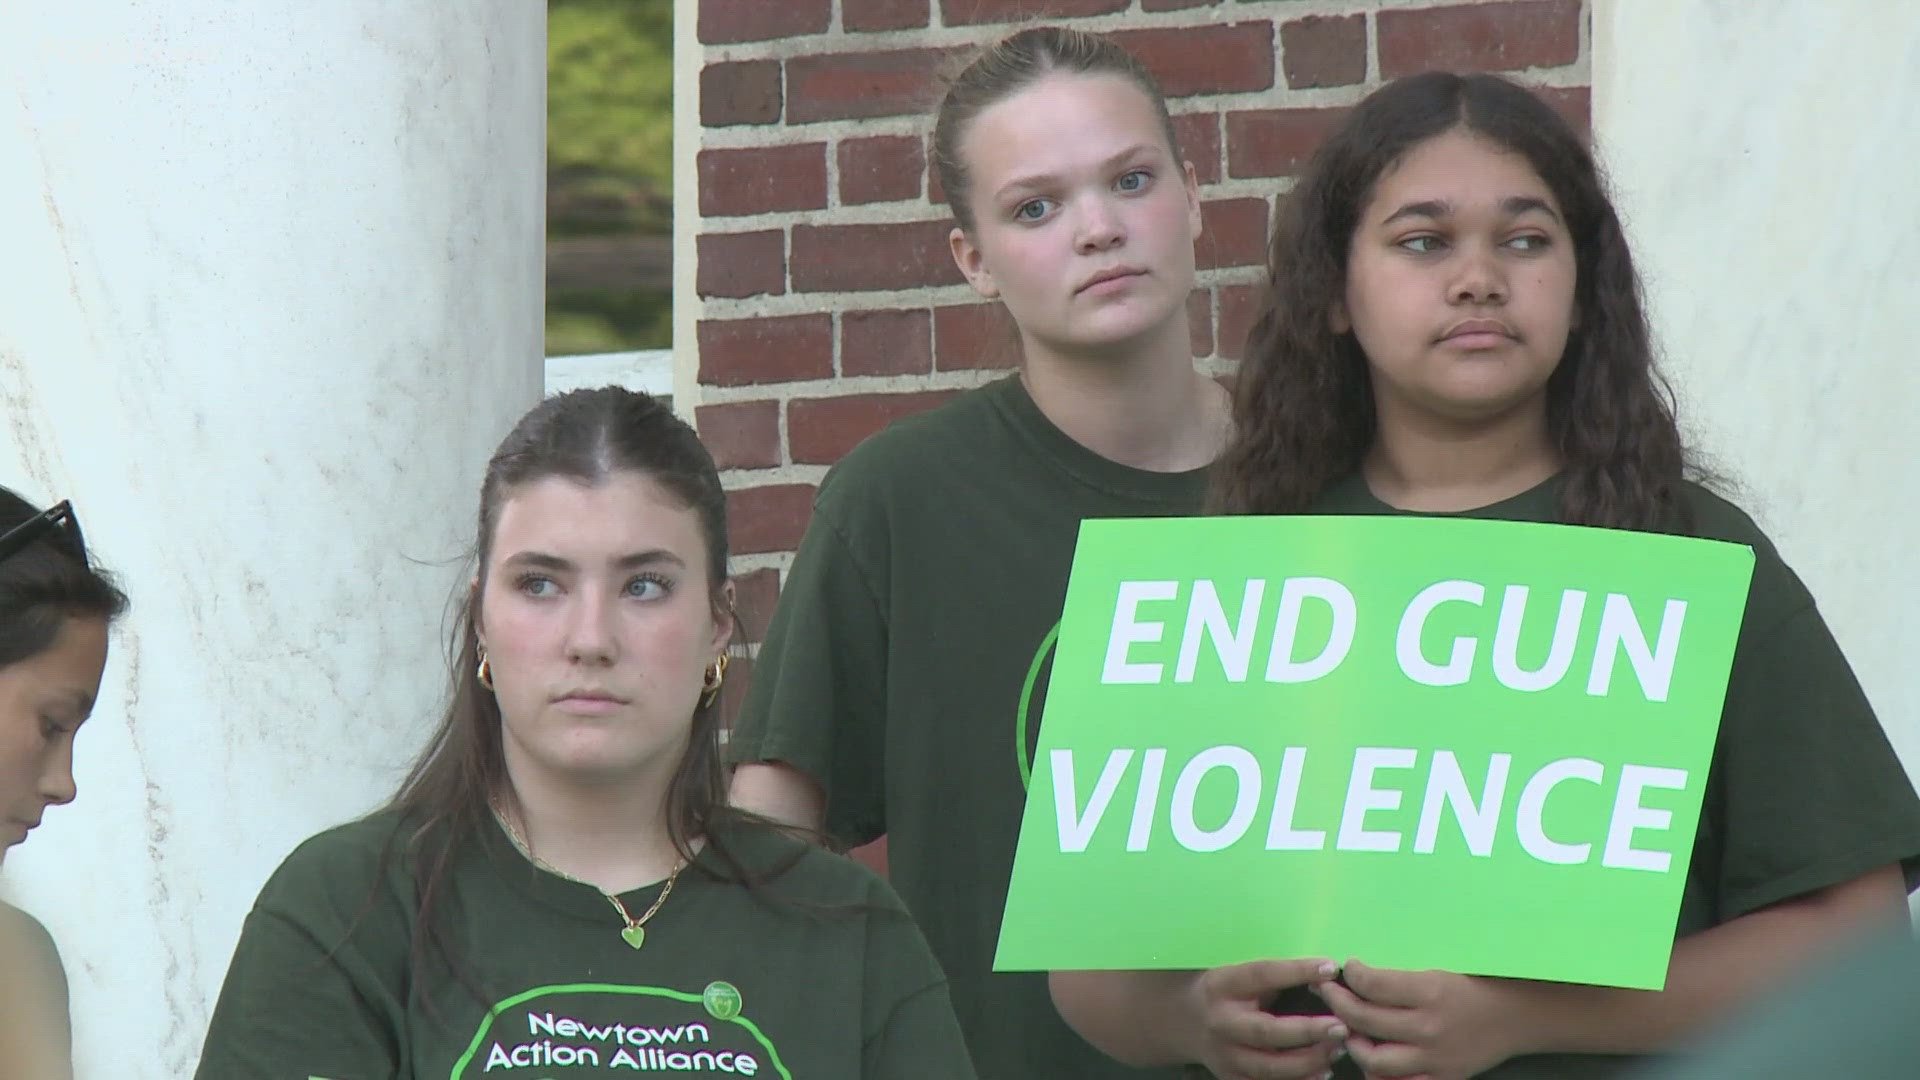 Friday marked the 10th annual National Gun Violence Awareness Day. According to the CDC, every day, more than 100 Americans are killed with guns.